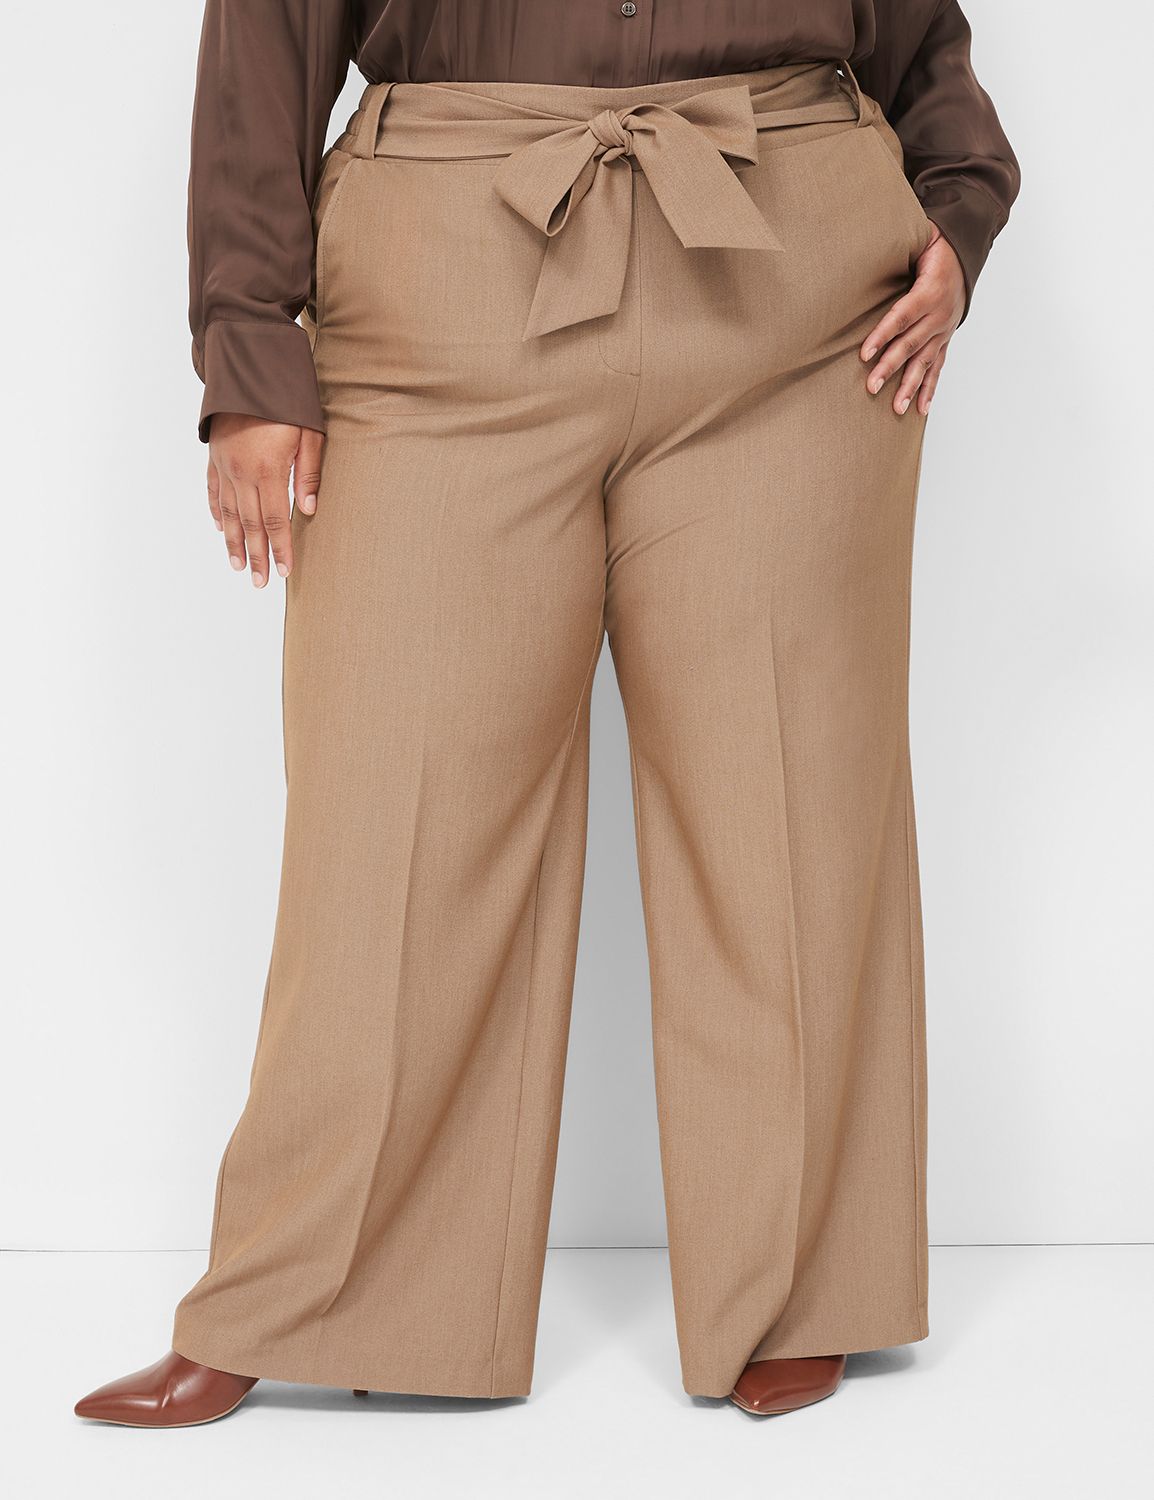 Avenue Cool Hand Straight Leg Pull-On Brown Pants Plus Size 26 Petite NWT